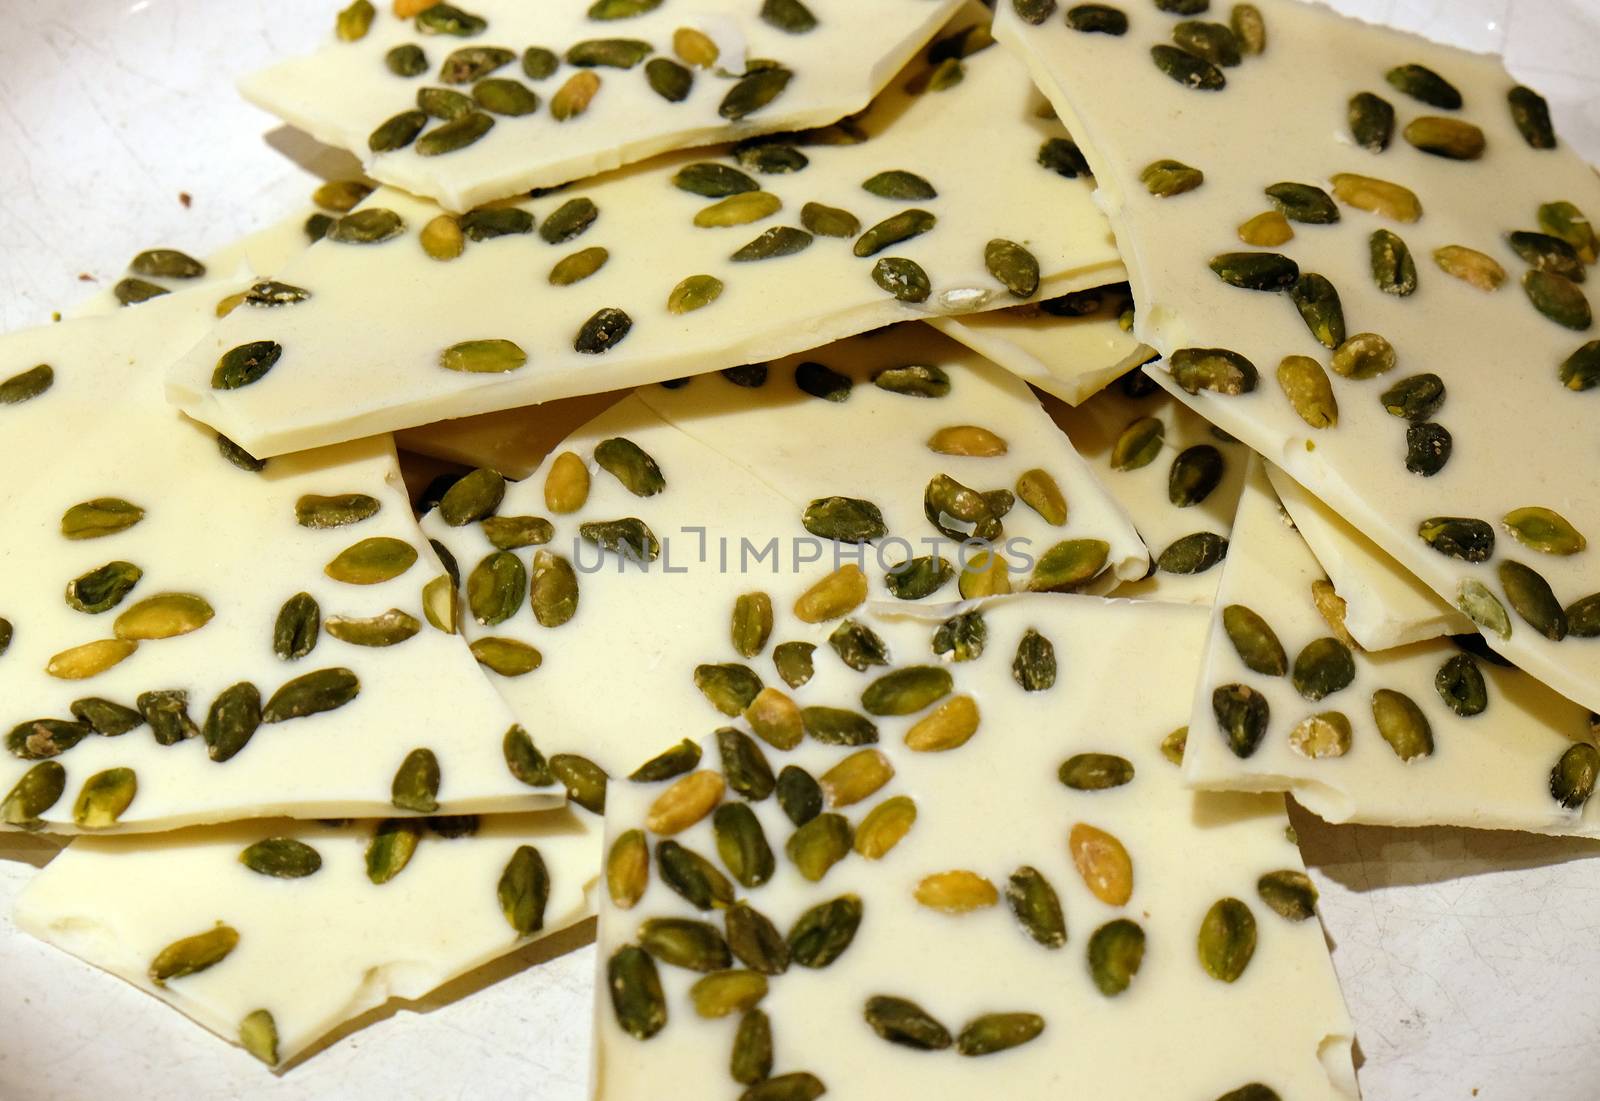 Homemade white chocolate with pistachios by atlas